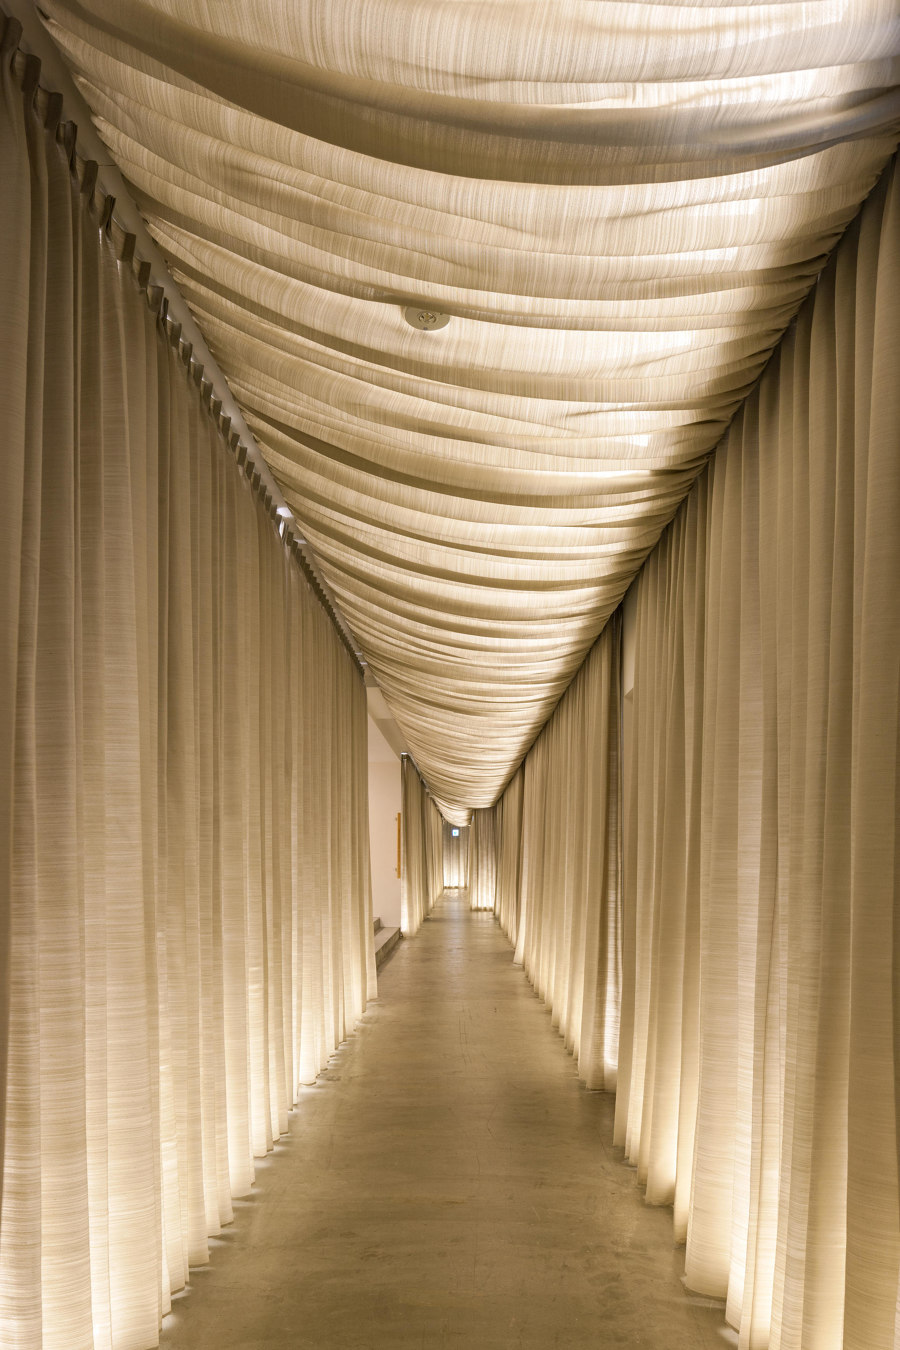 Pure fabrication: textiles in architecture | News